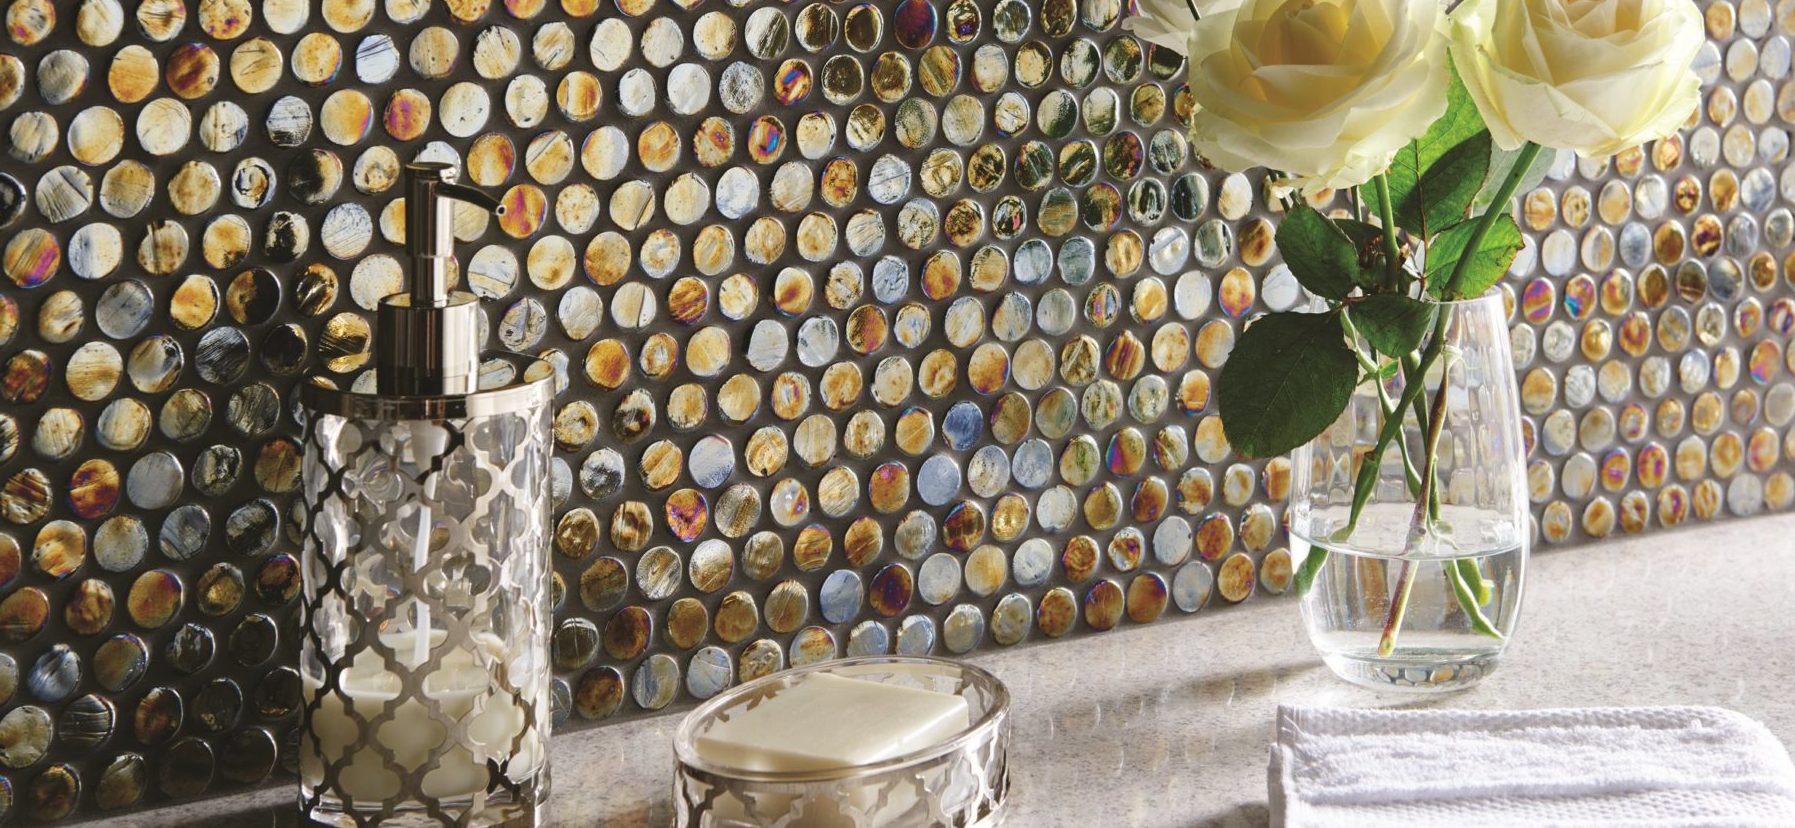 How Mosaics Can Make Your Home An Envy Of Your Neighbors